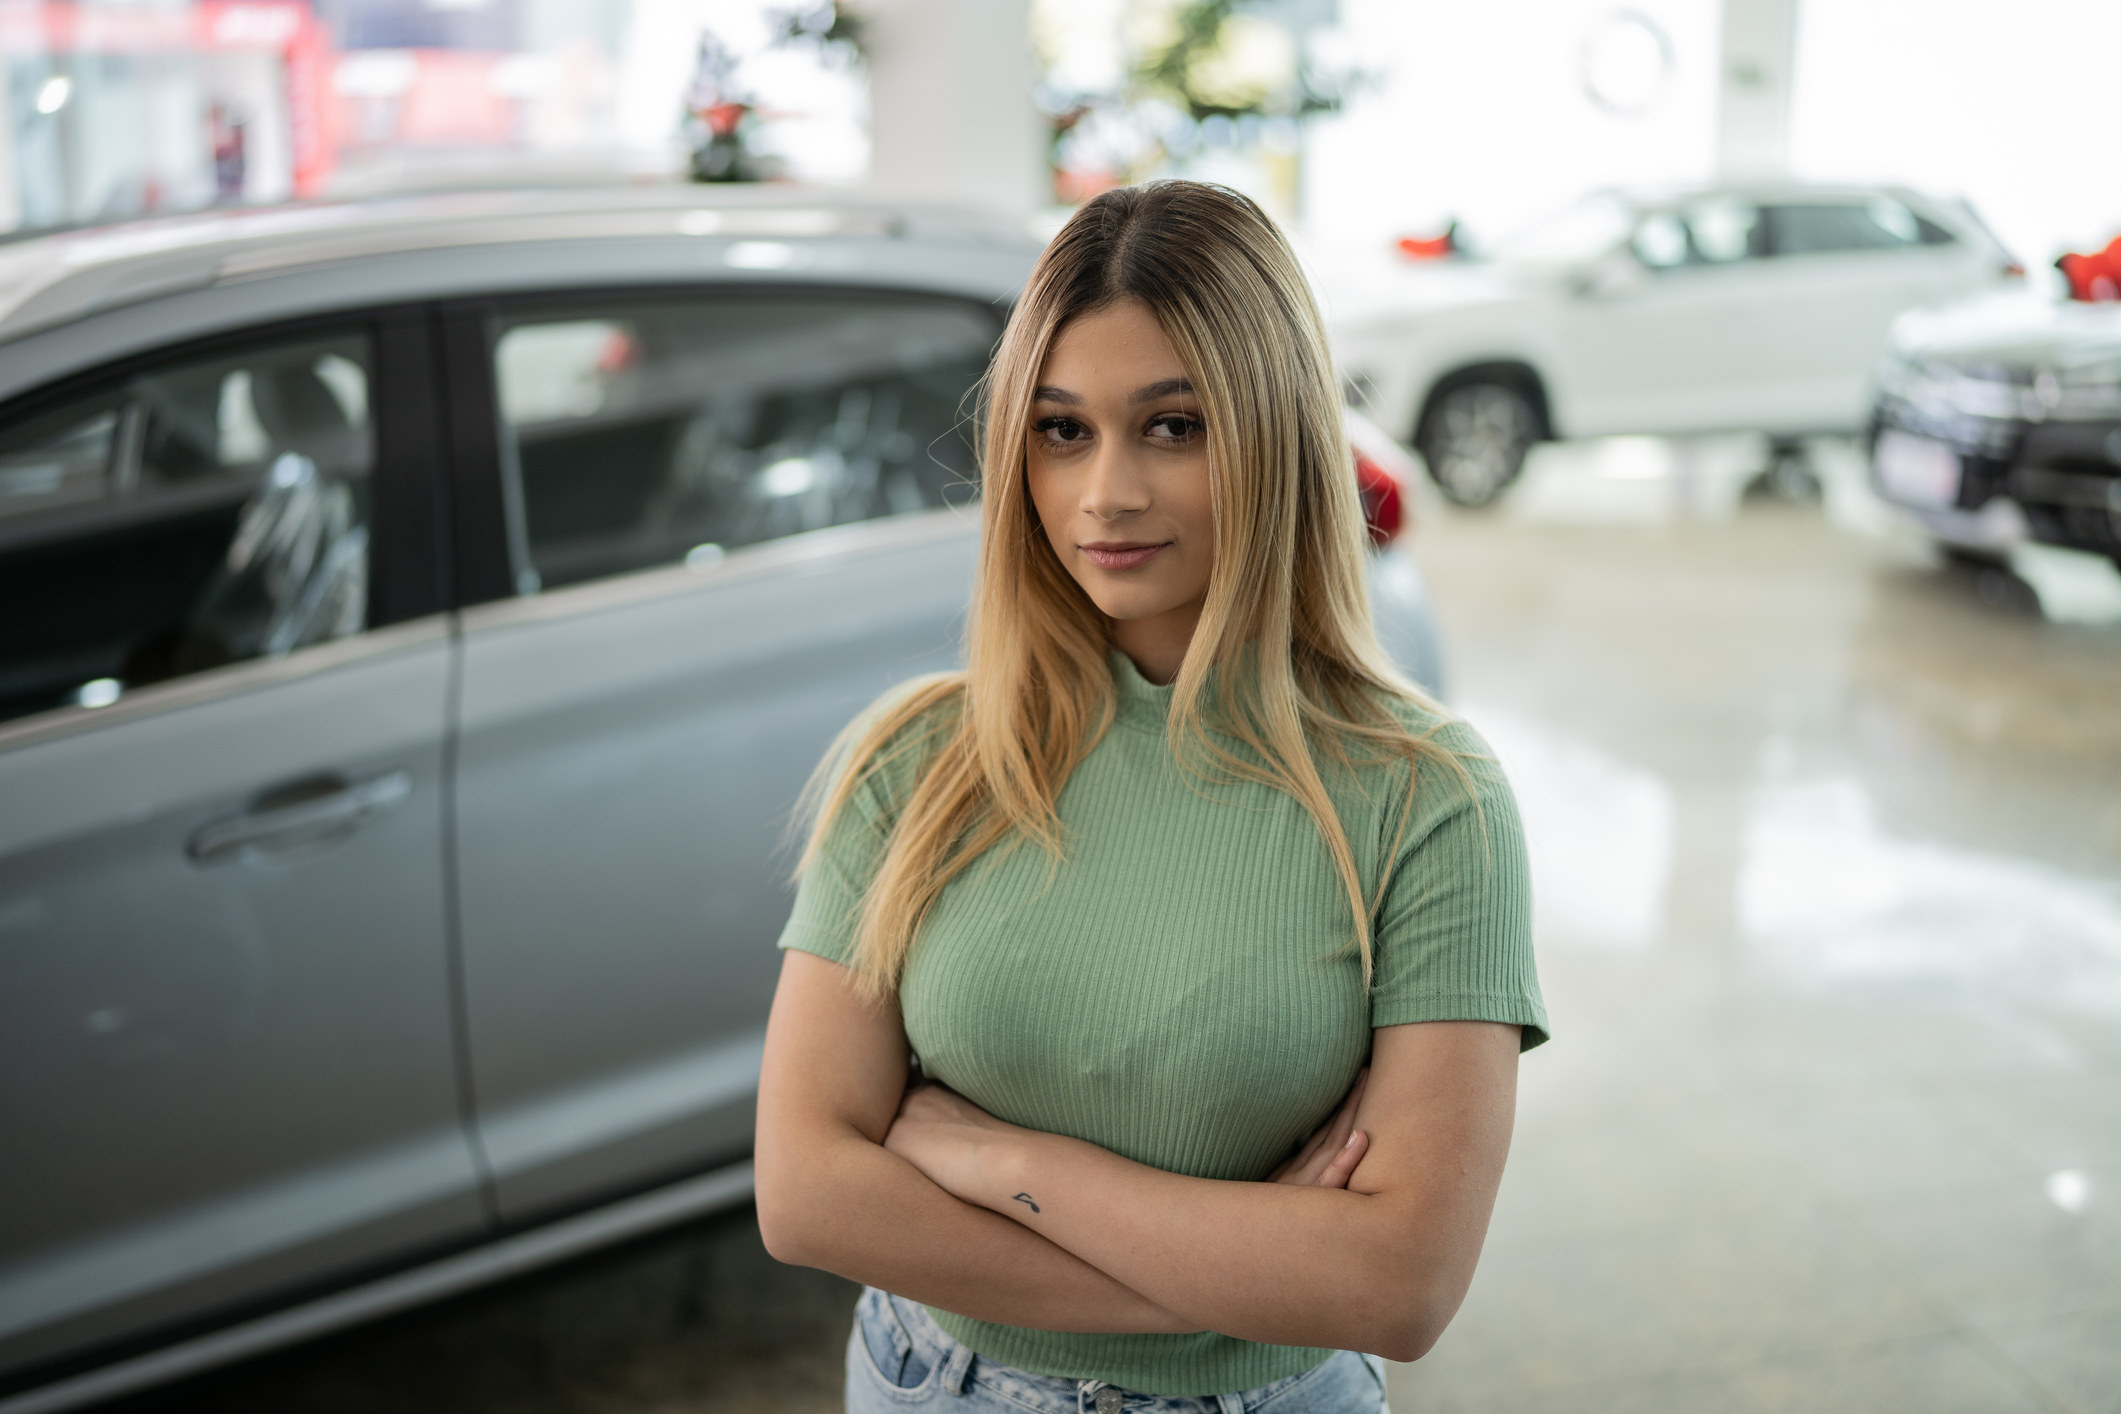 A young girl standing in a car showroom